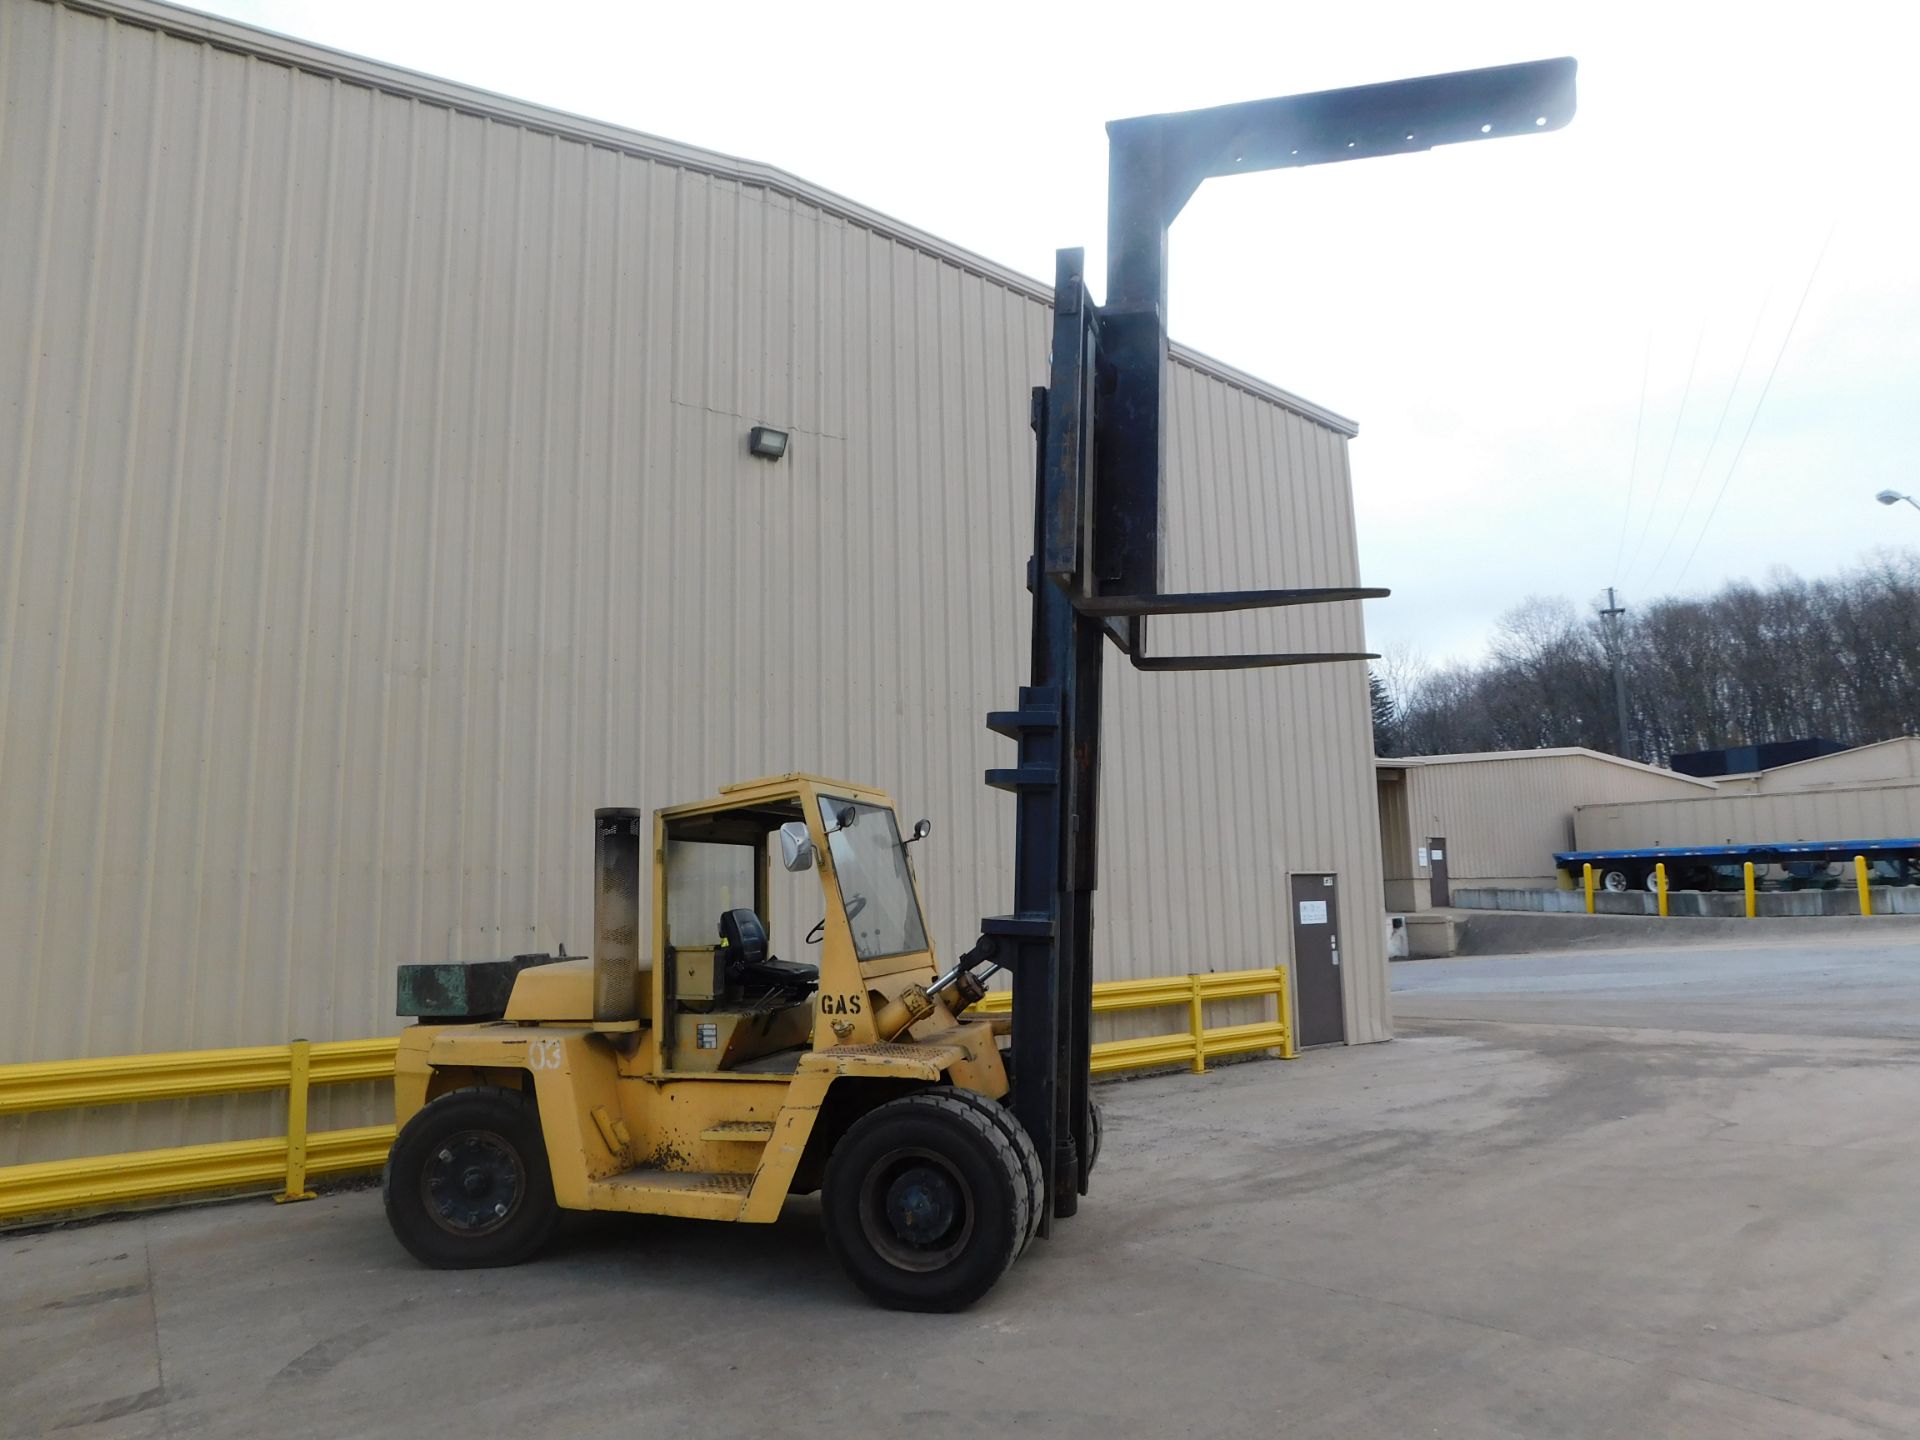 CLARK C500YS250 25,000 LB GAS FORKLIFT WITH 8' BOOM. 60" x 8" FORKS - Image 9 of 17